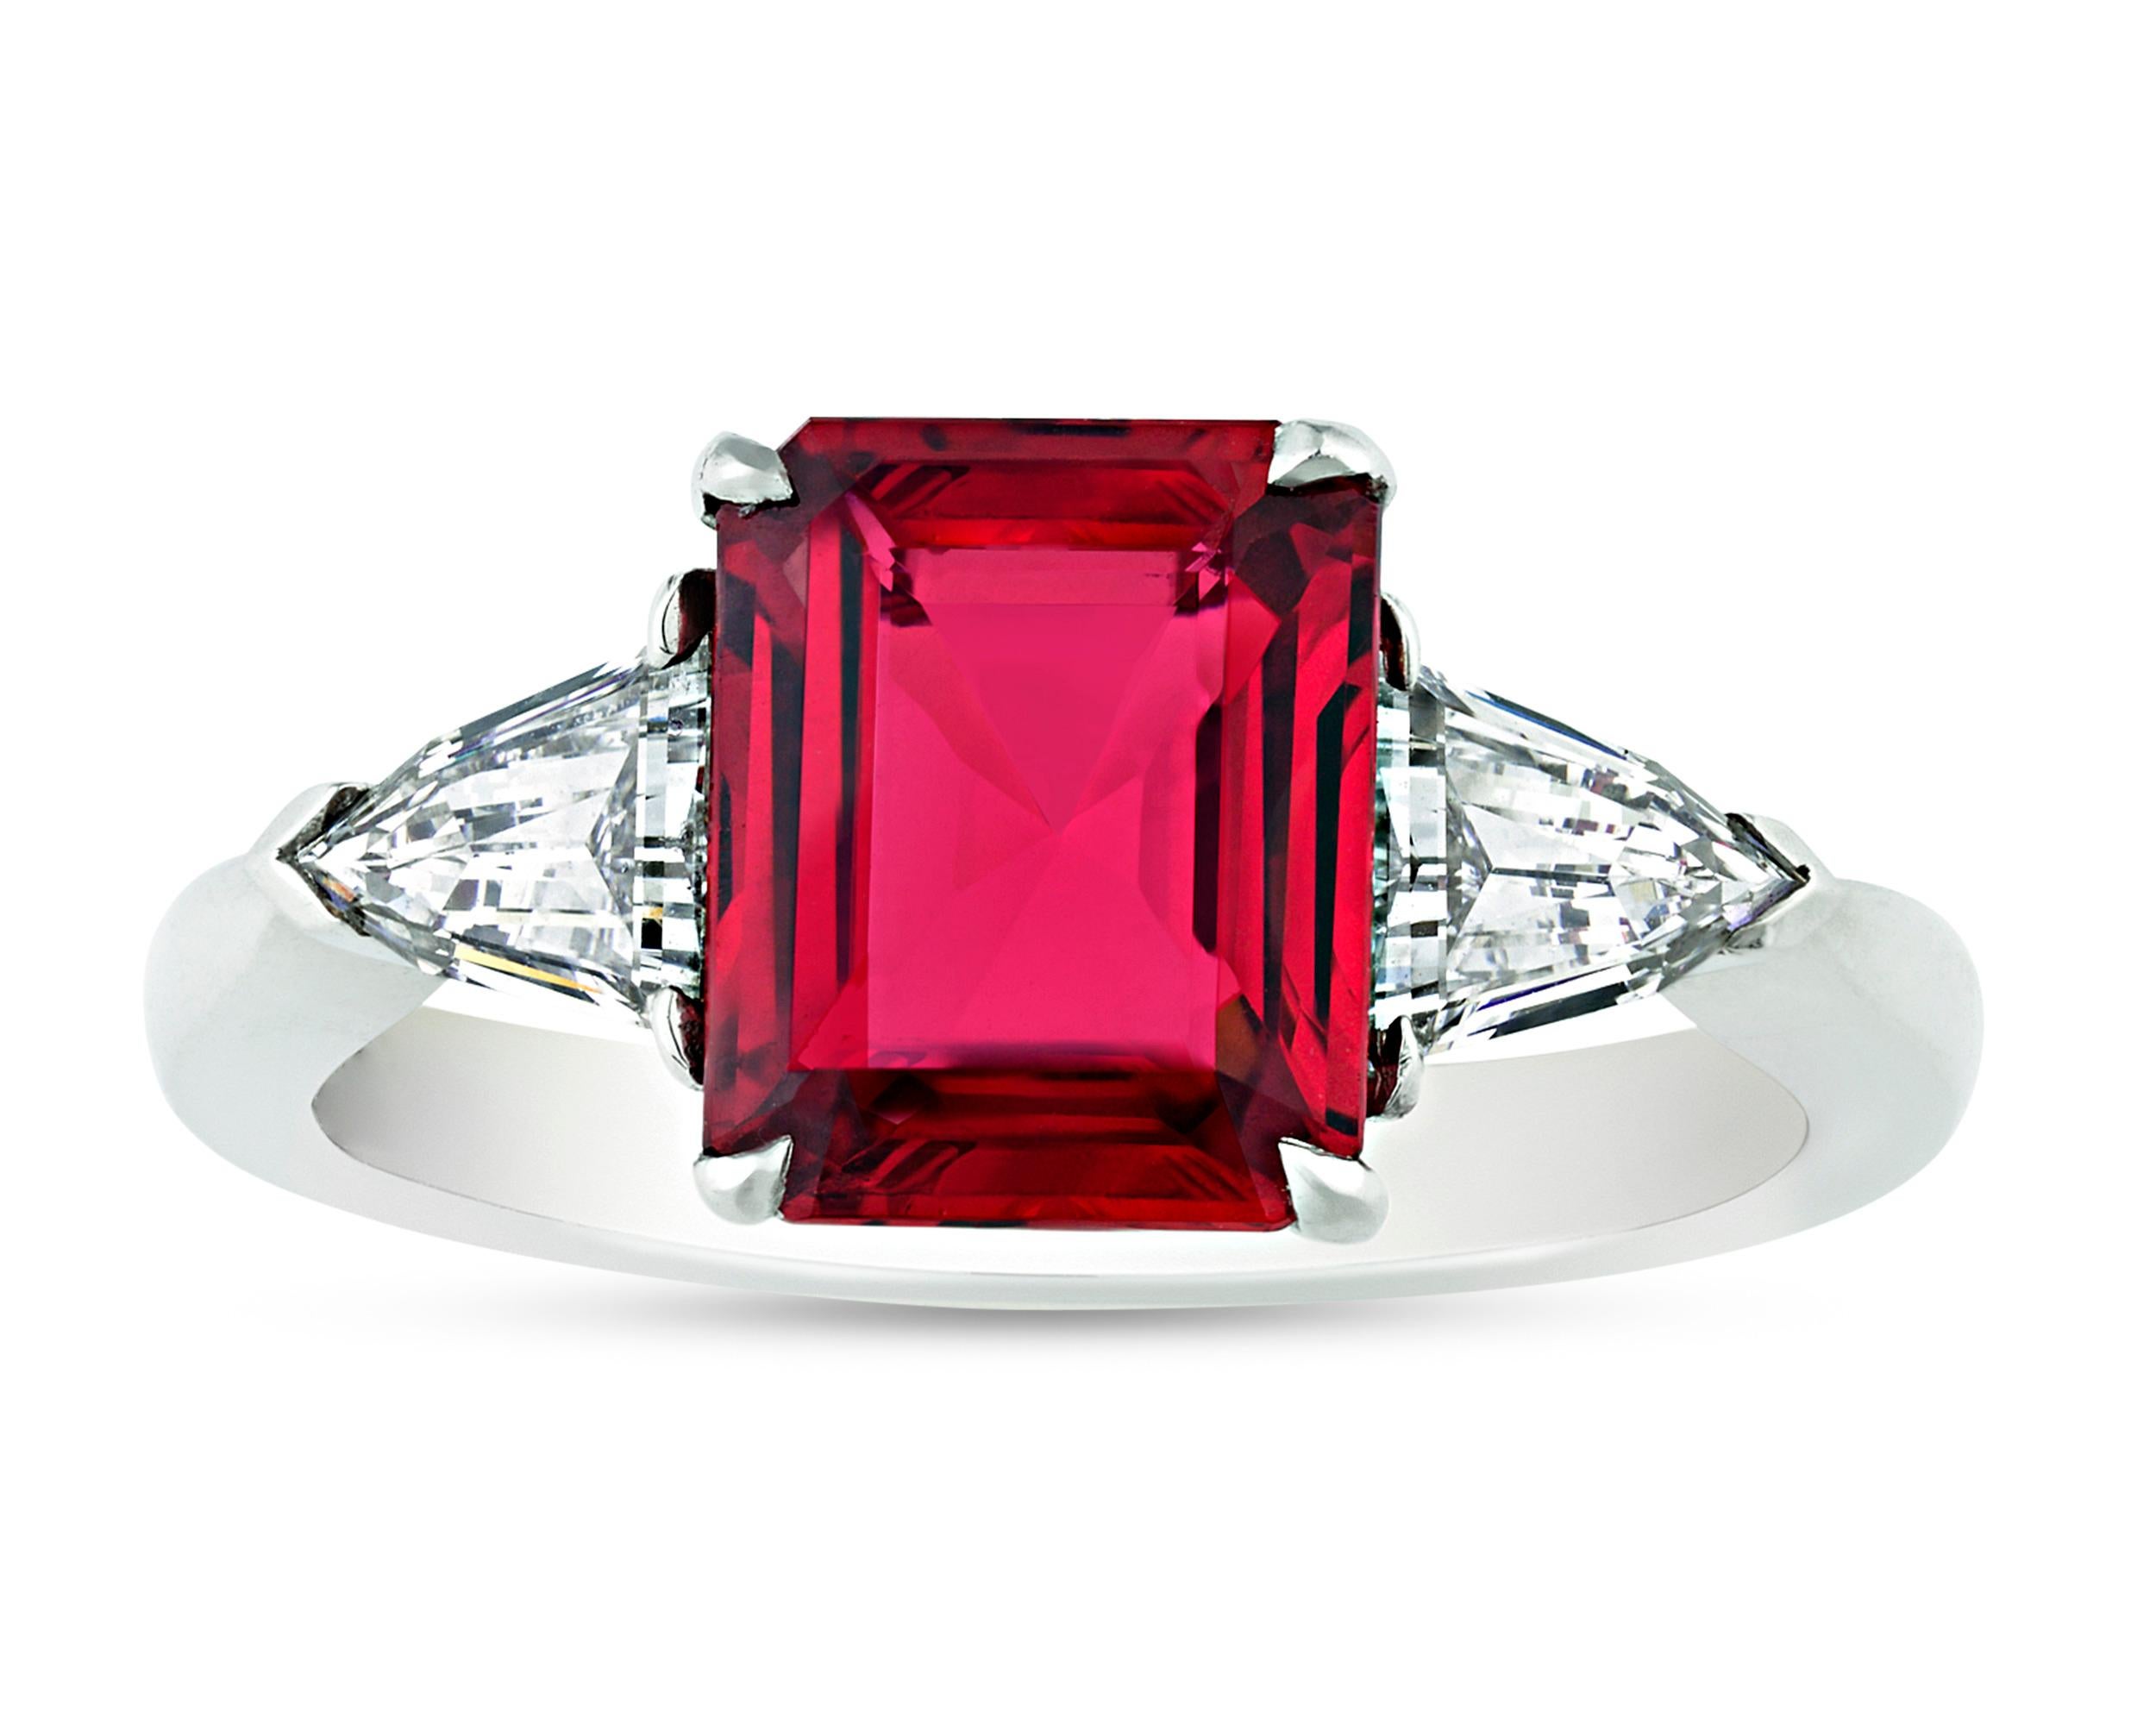 A crimson red, emerald-cut spinel weighing 2.03 carats is joined by a pair of white, triangular diamonds totaling 0.60 carat. The vibrant central gem is certified by the Gemological Institute of America as a natural Burmese spinel. Set in platinum.